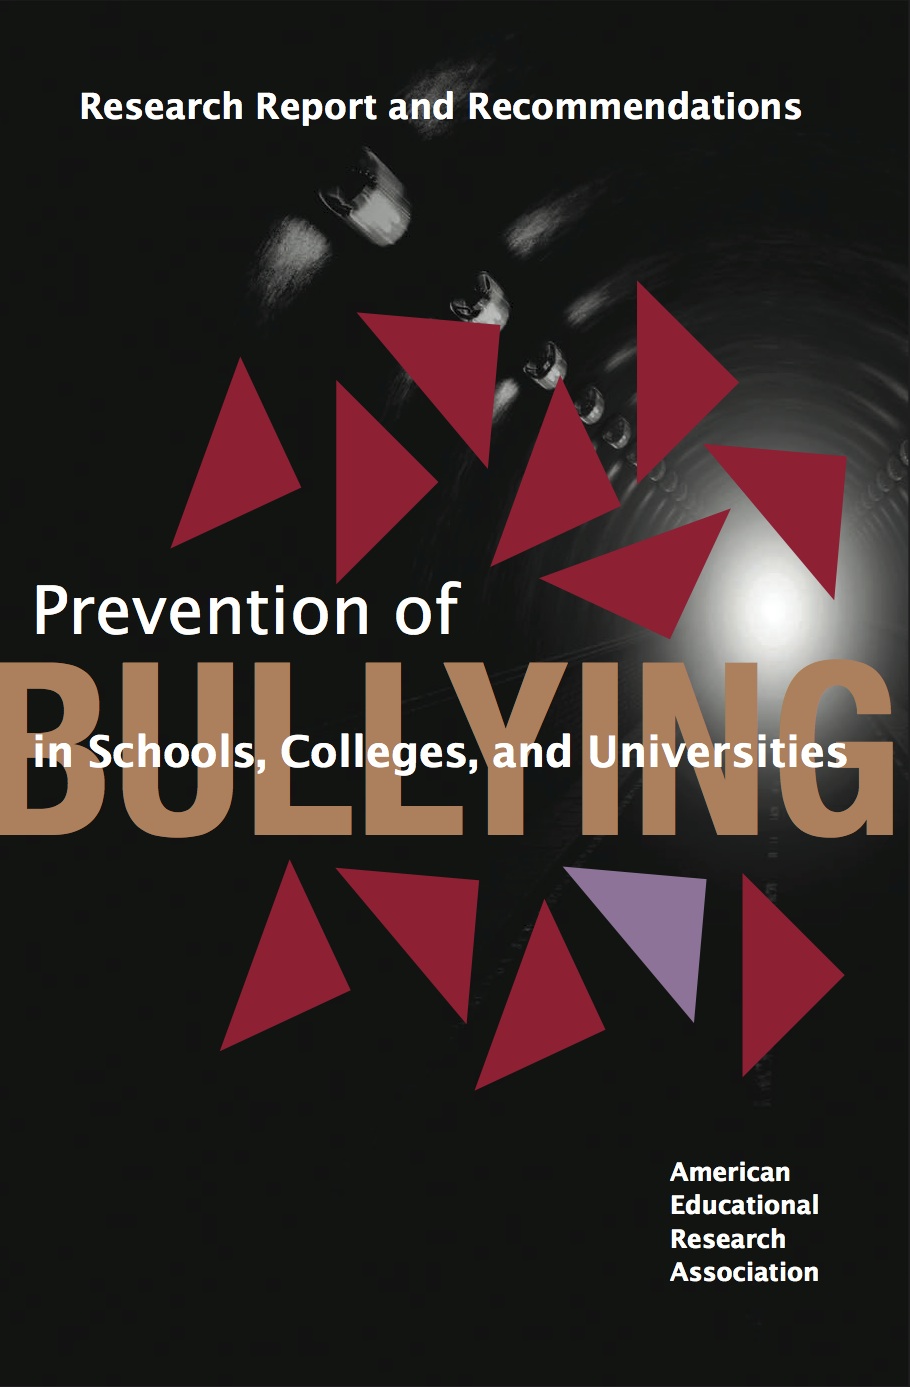 research topics about school bullying